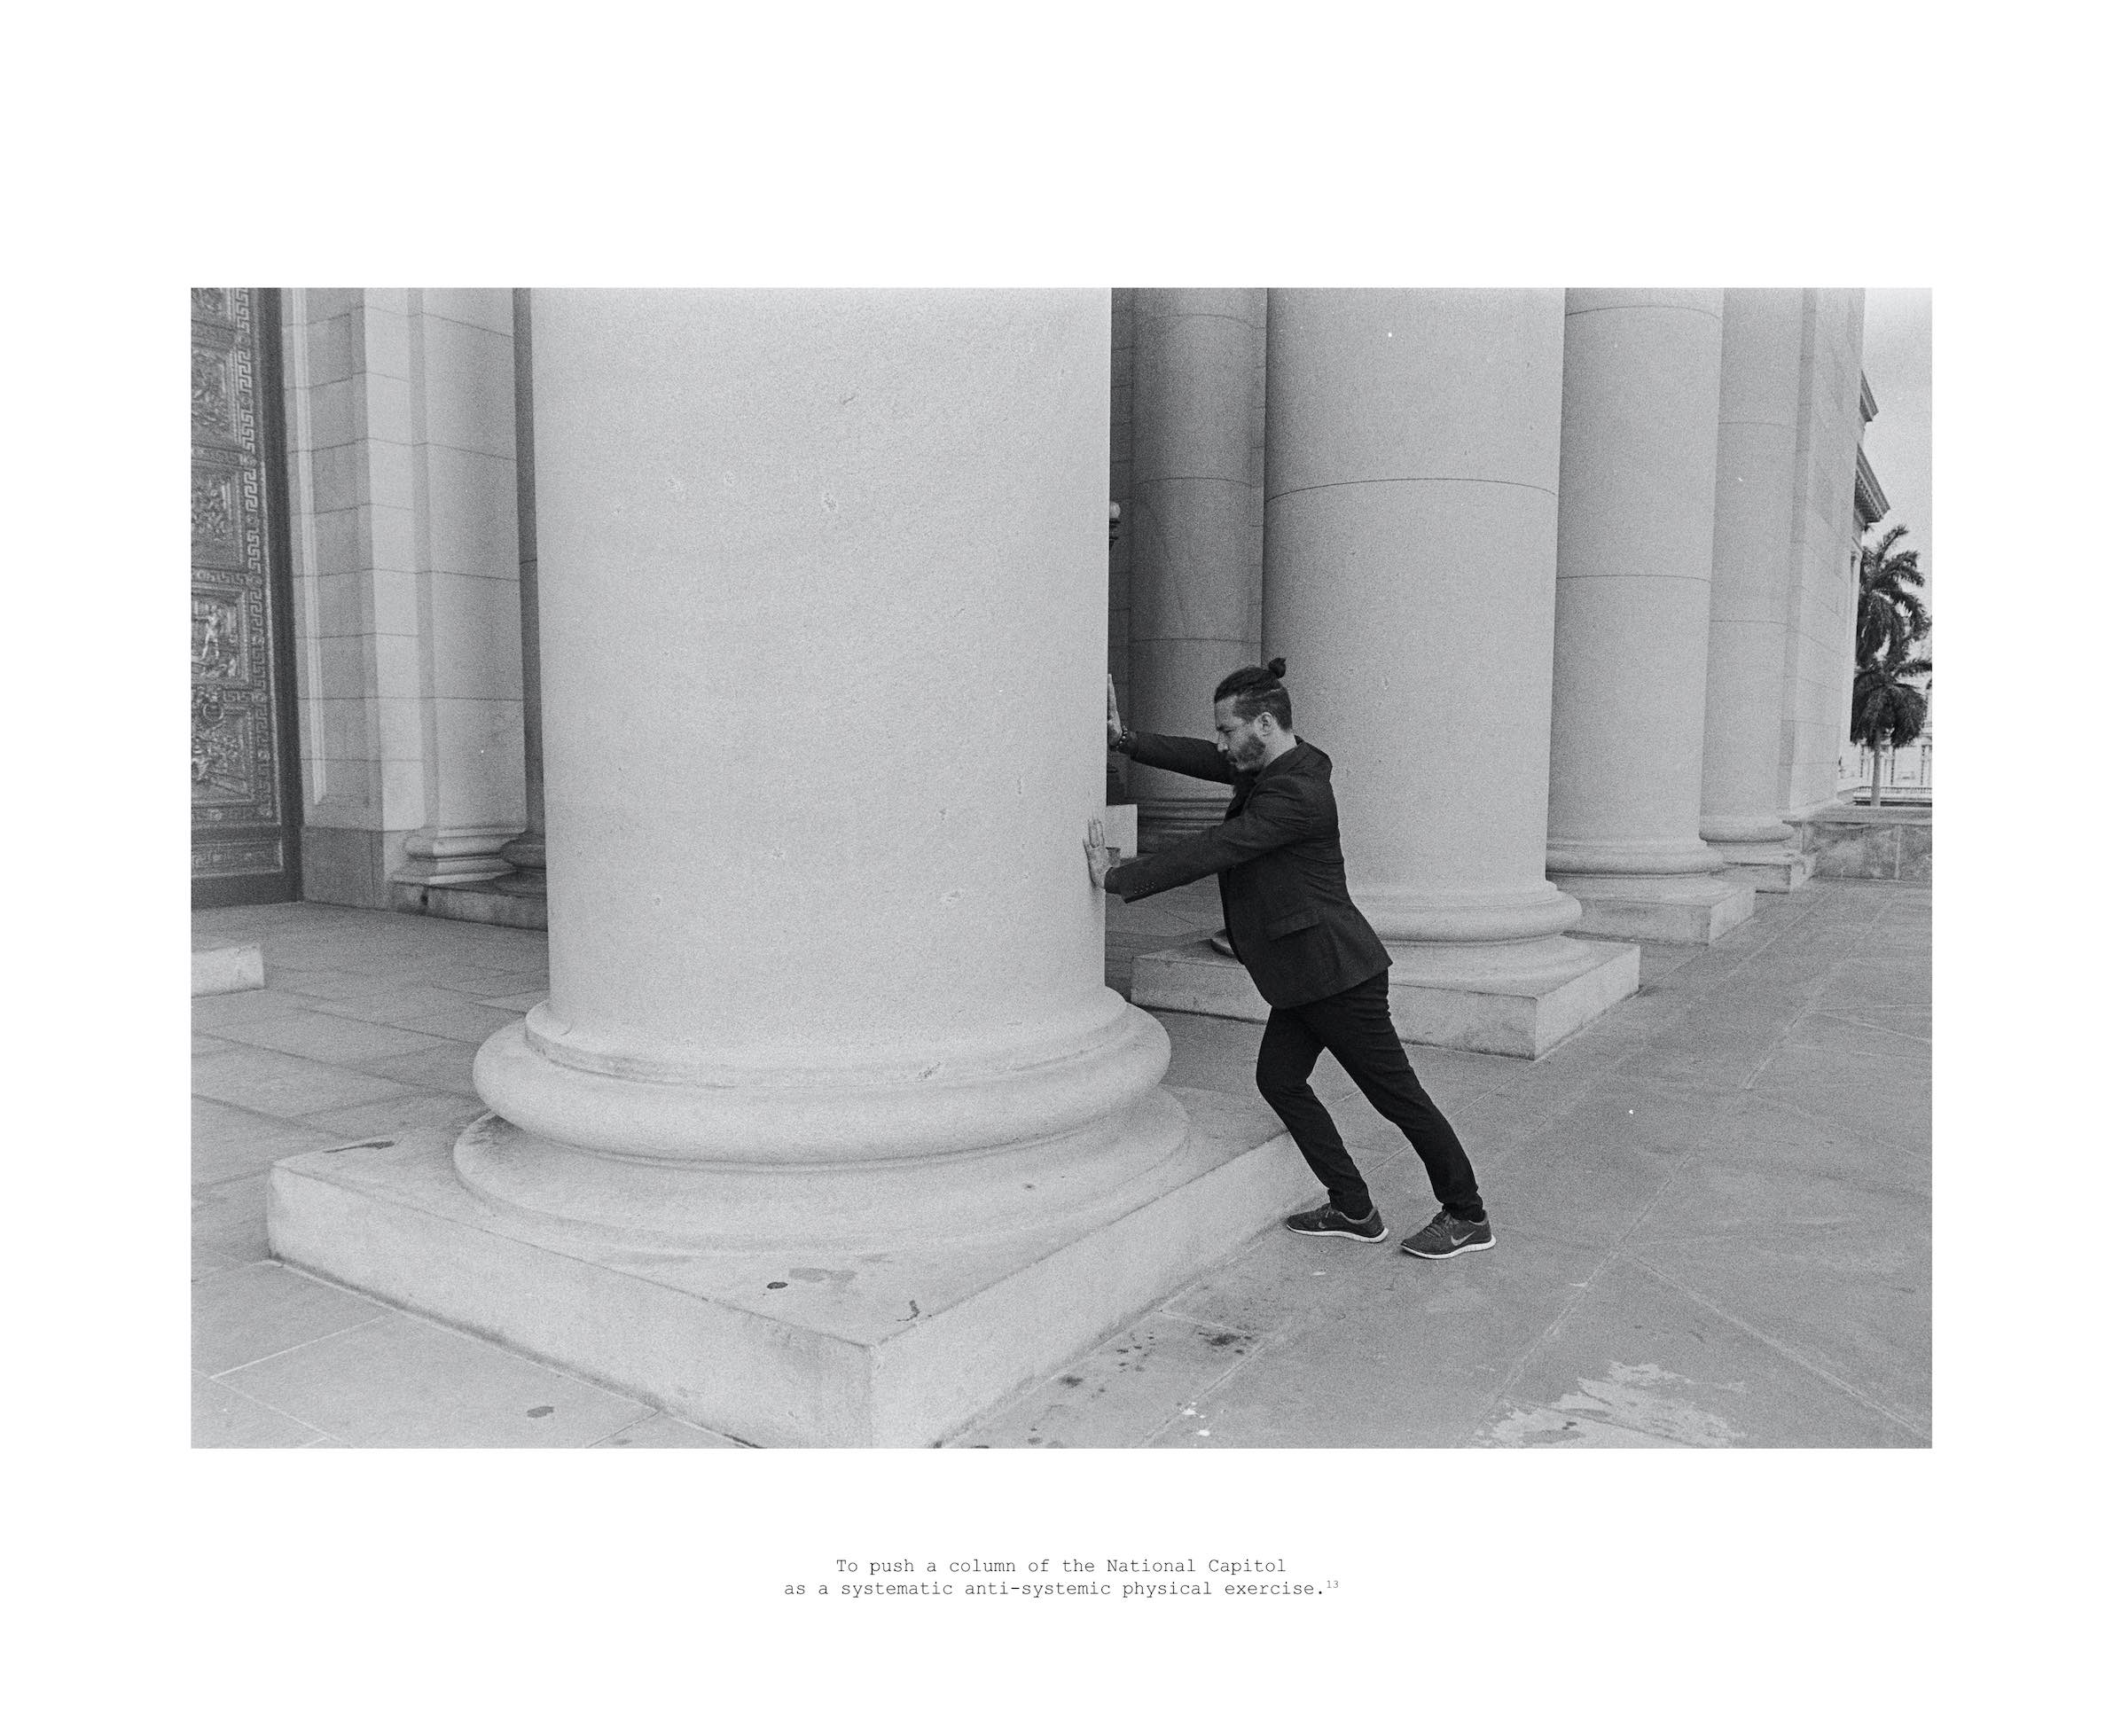 Reynier Leyva Novo - Blank Check - About how to empty the mind (To push a column of the National Capitol as a systematic anti-systemic physical exercise), 2020, 35 mm photograph, archival print on Hahnemuhle photo rag Baryta paper, 18 x 22 inches unframed, edition of 3